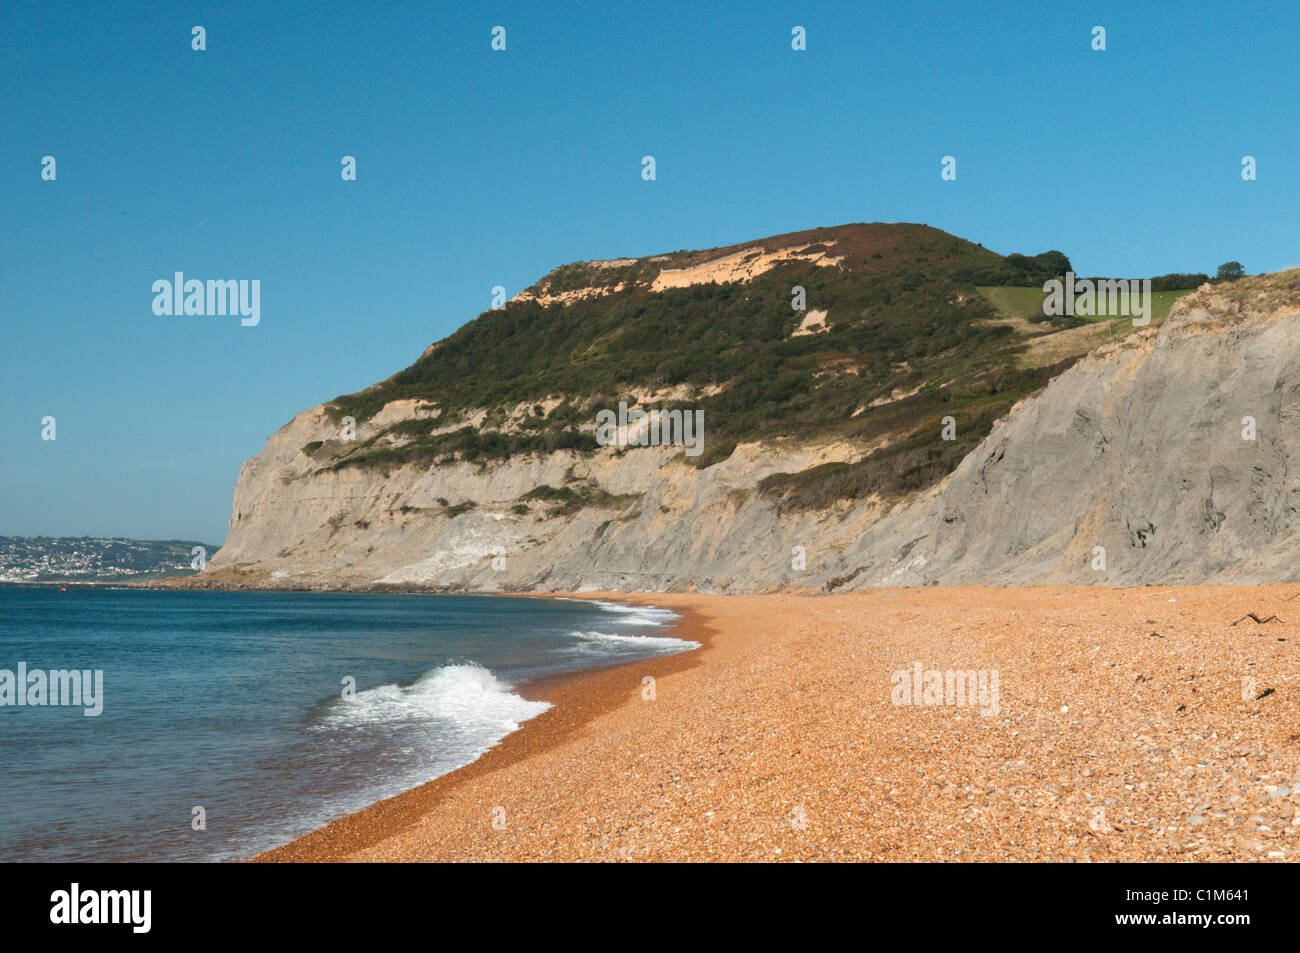 The pea-shingle beach at Seatown, Near Bridport, Dorset, UK. View west to Golden Cap, hill capped with greensand rock. Stock Photo